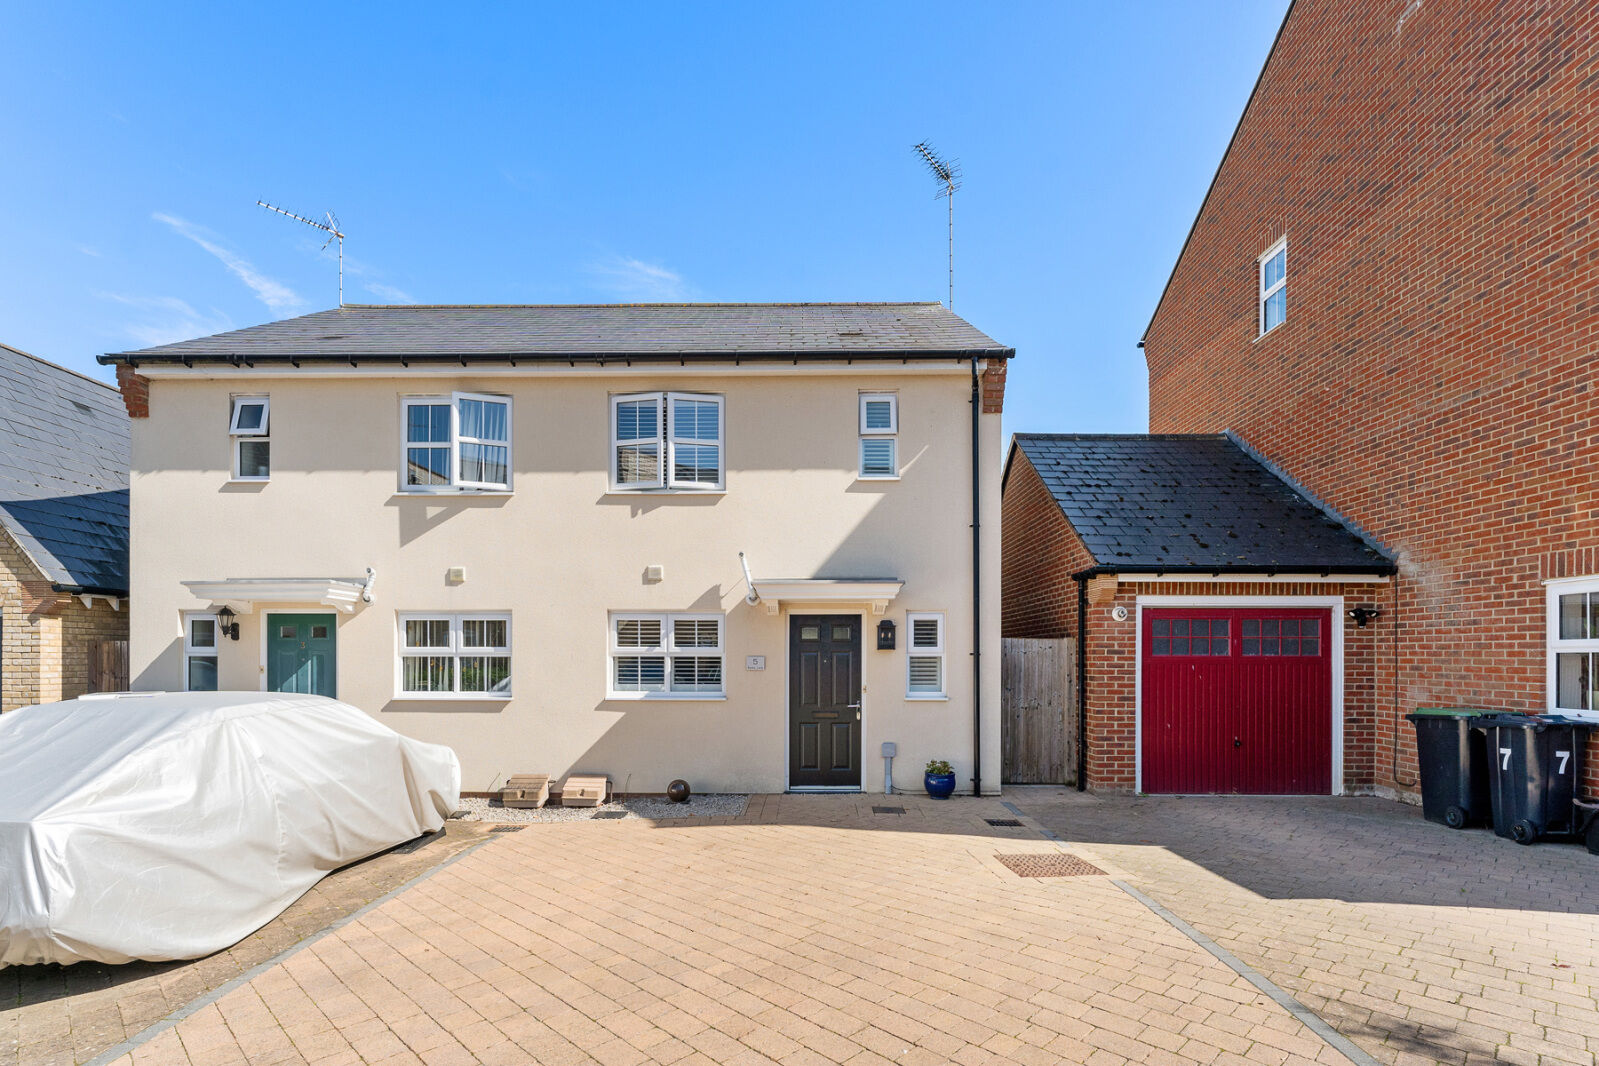 2 bedroom semi detached house for sale Banks Lane, Stansted, CM24, main image